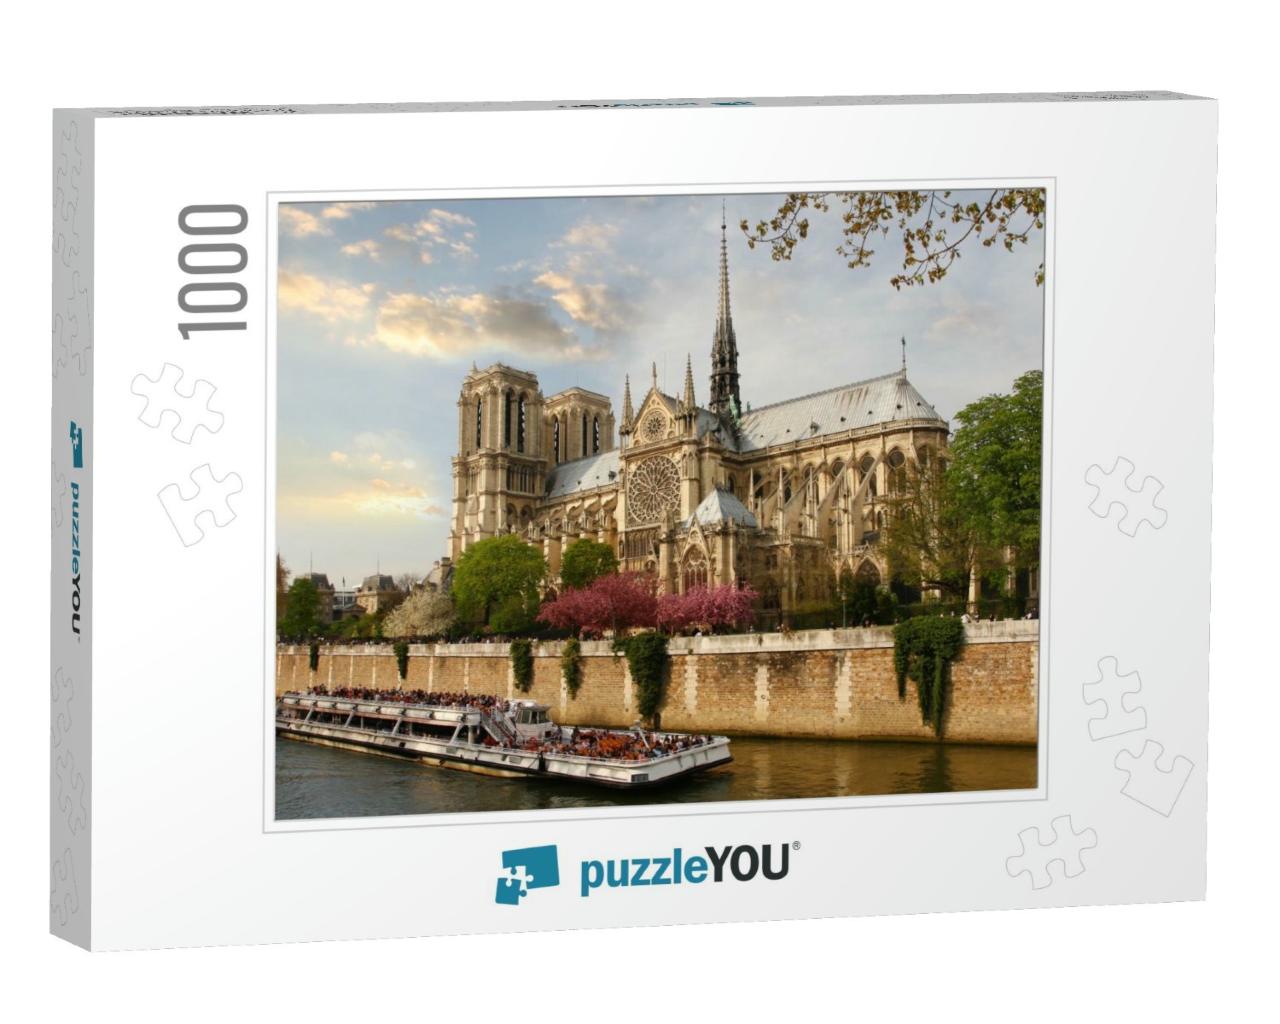 Paris, Notre Dame with Boat on Seine, France... Jigsaw Puzzle with 1000 pieces